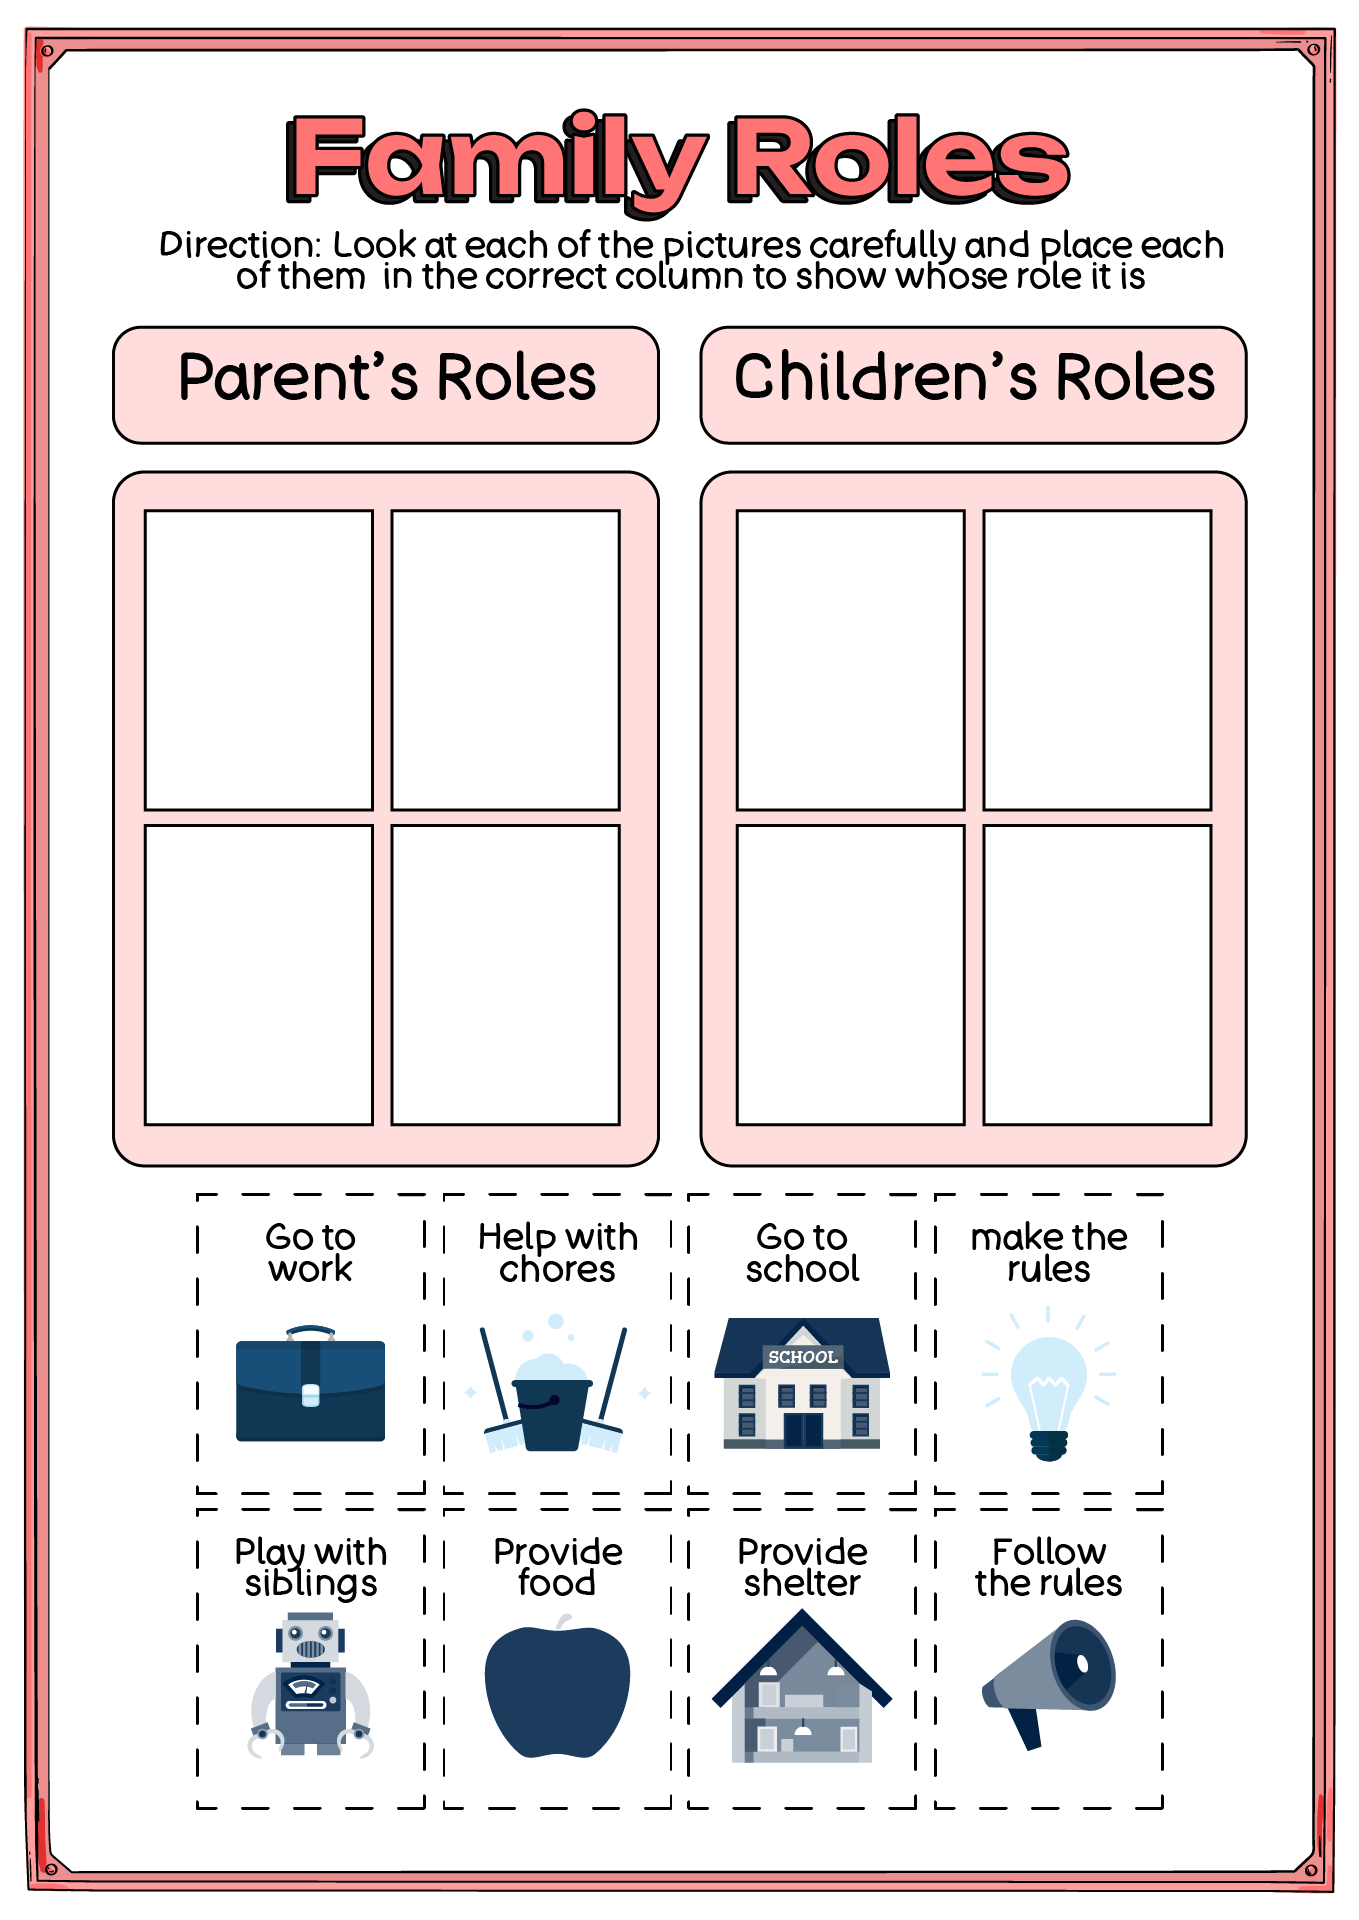 12 Best Images of Dysfunctional Family Roles Worksheet - Dysfunctional